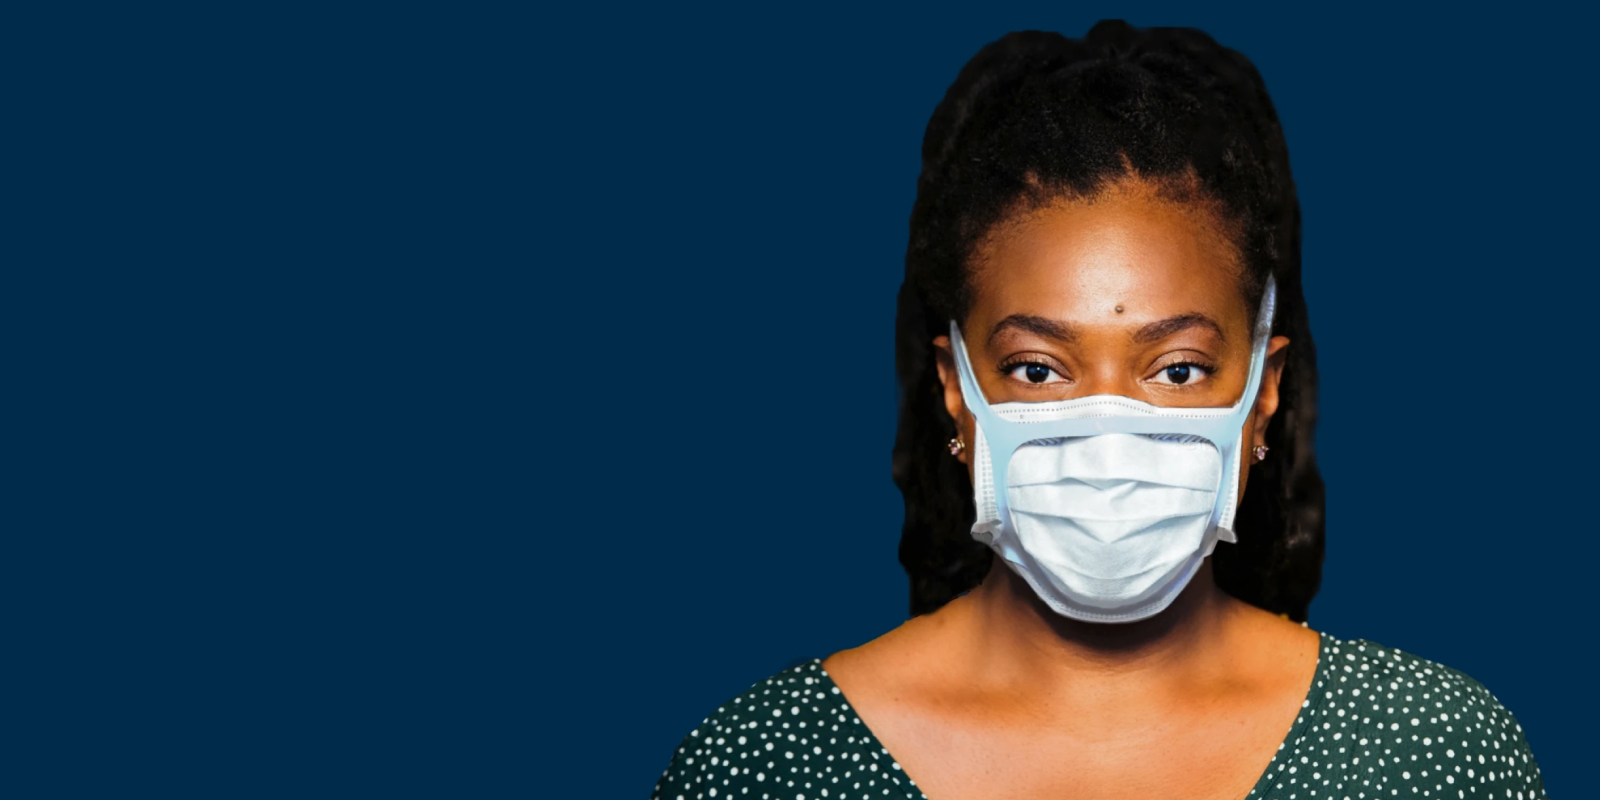 Fix the Mask turns to Qualio Plus to bring a medical device to market during the pandemic